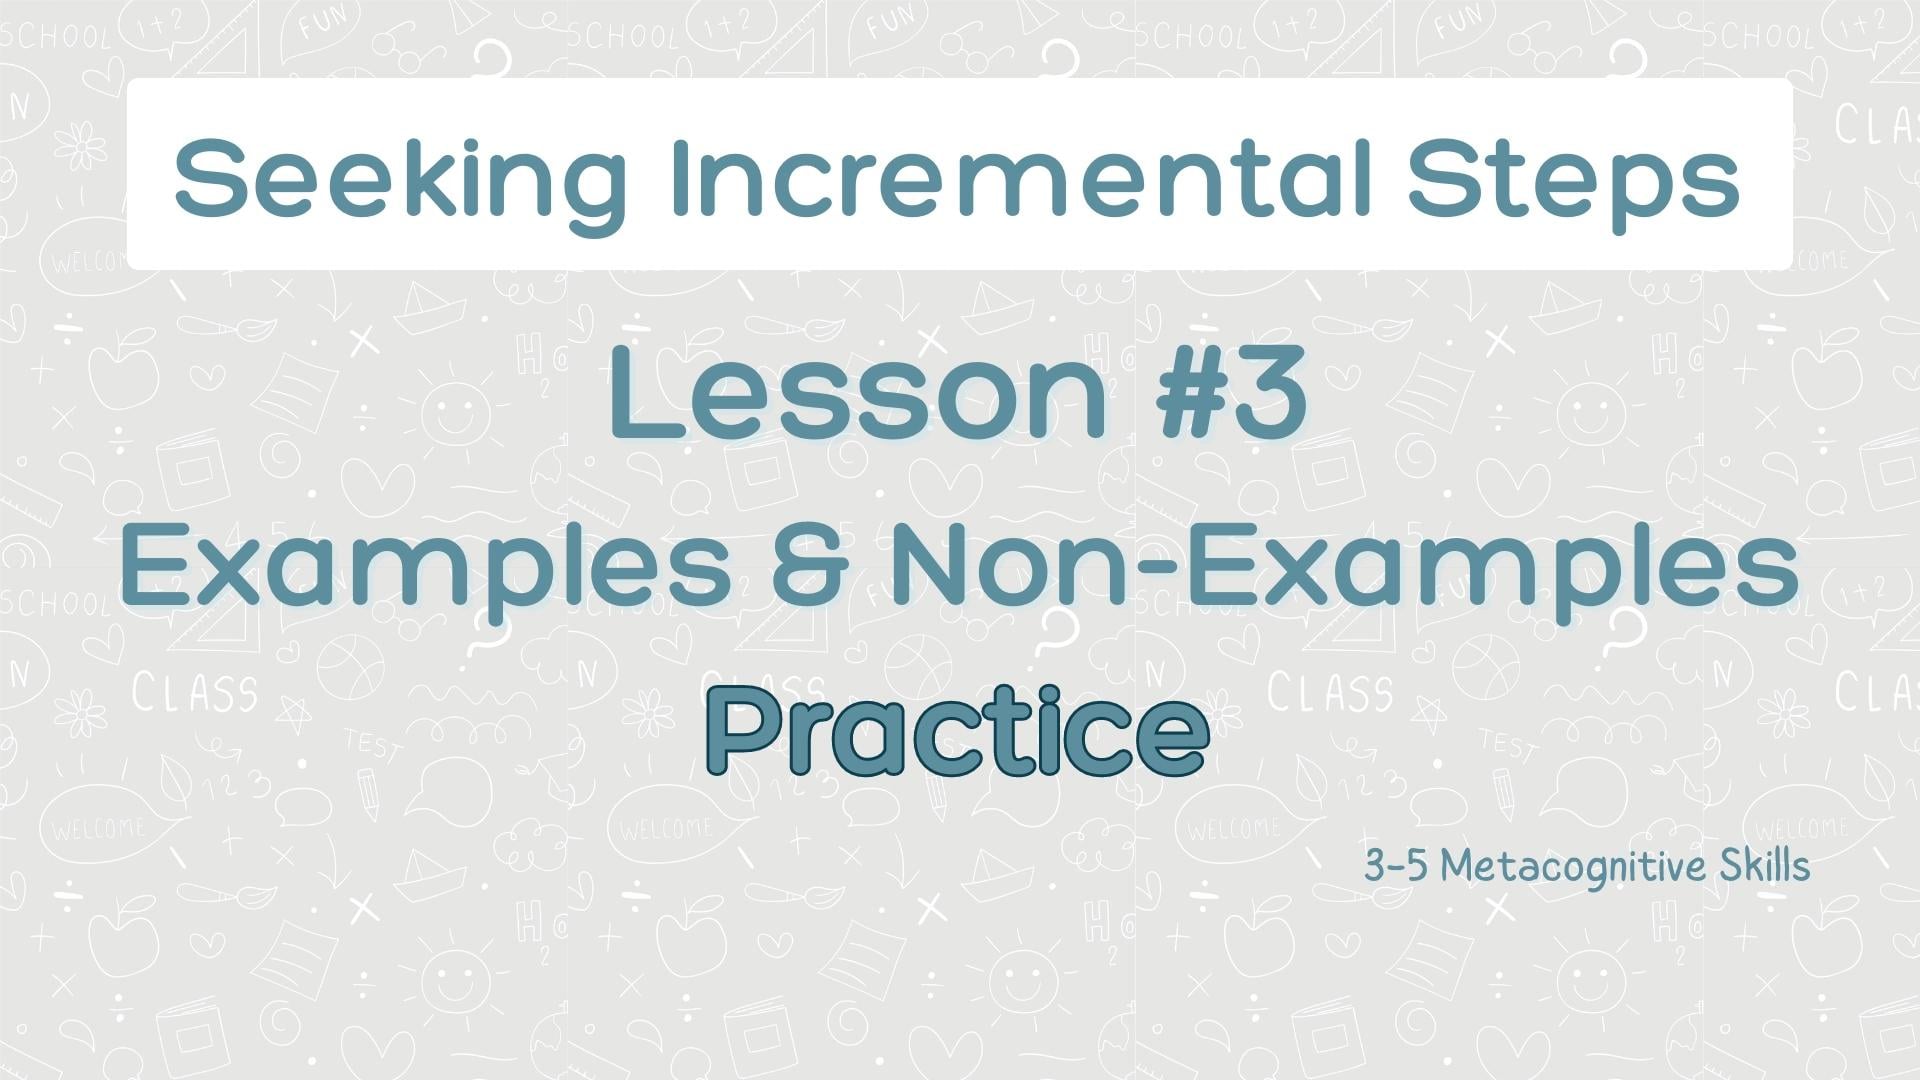 Lesson #3 Examples & Non-Examples video thumbnail